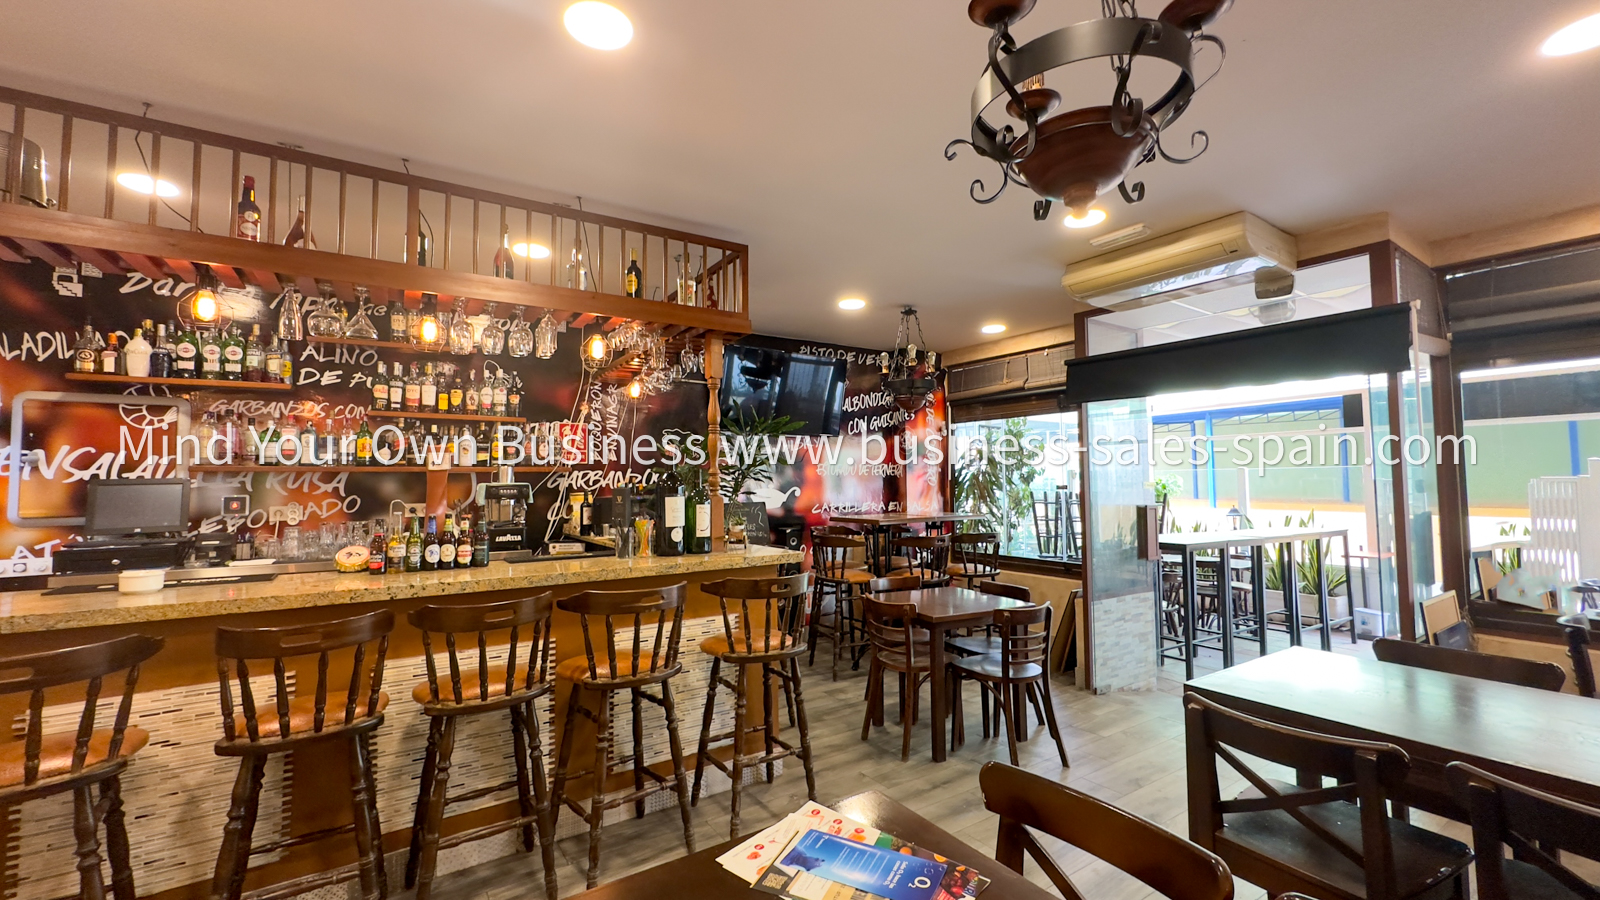 An Exquisite Wine Bar in Busy Location in Central Fuengirola.